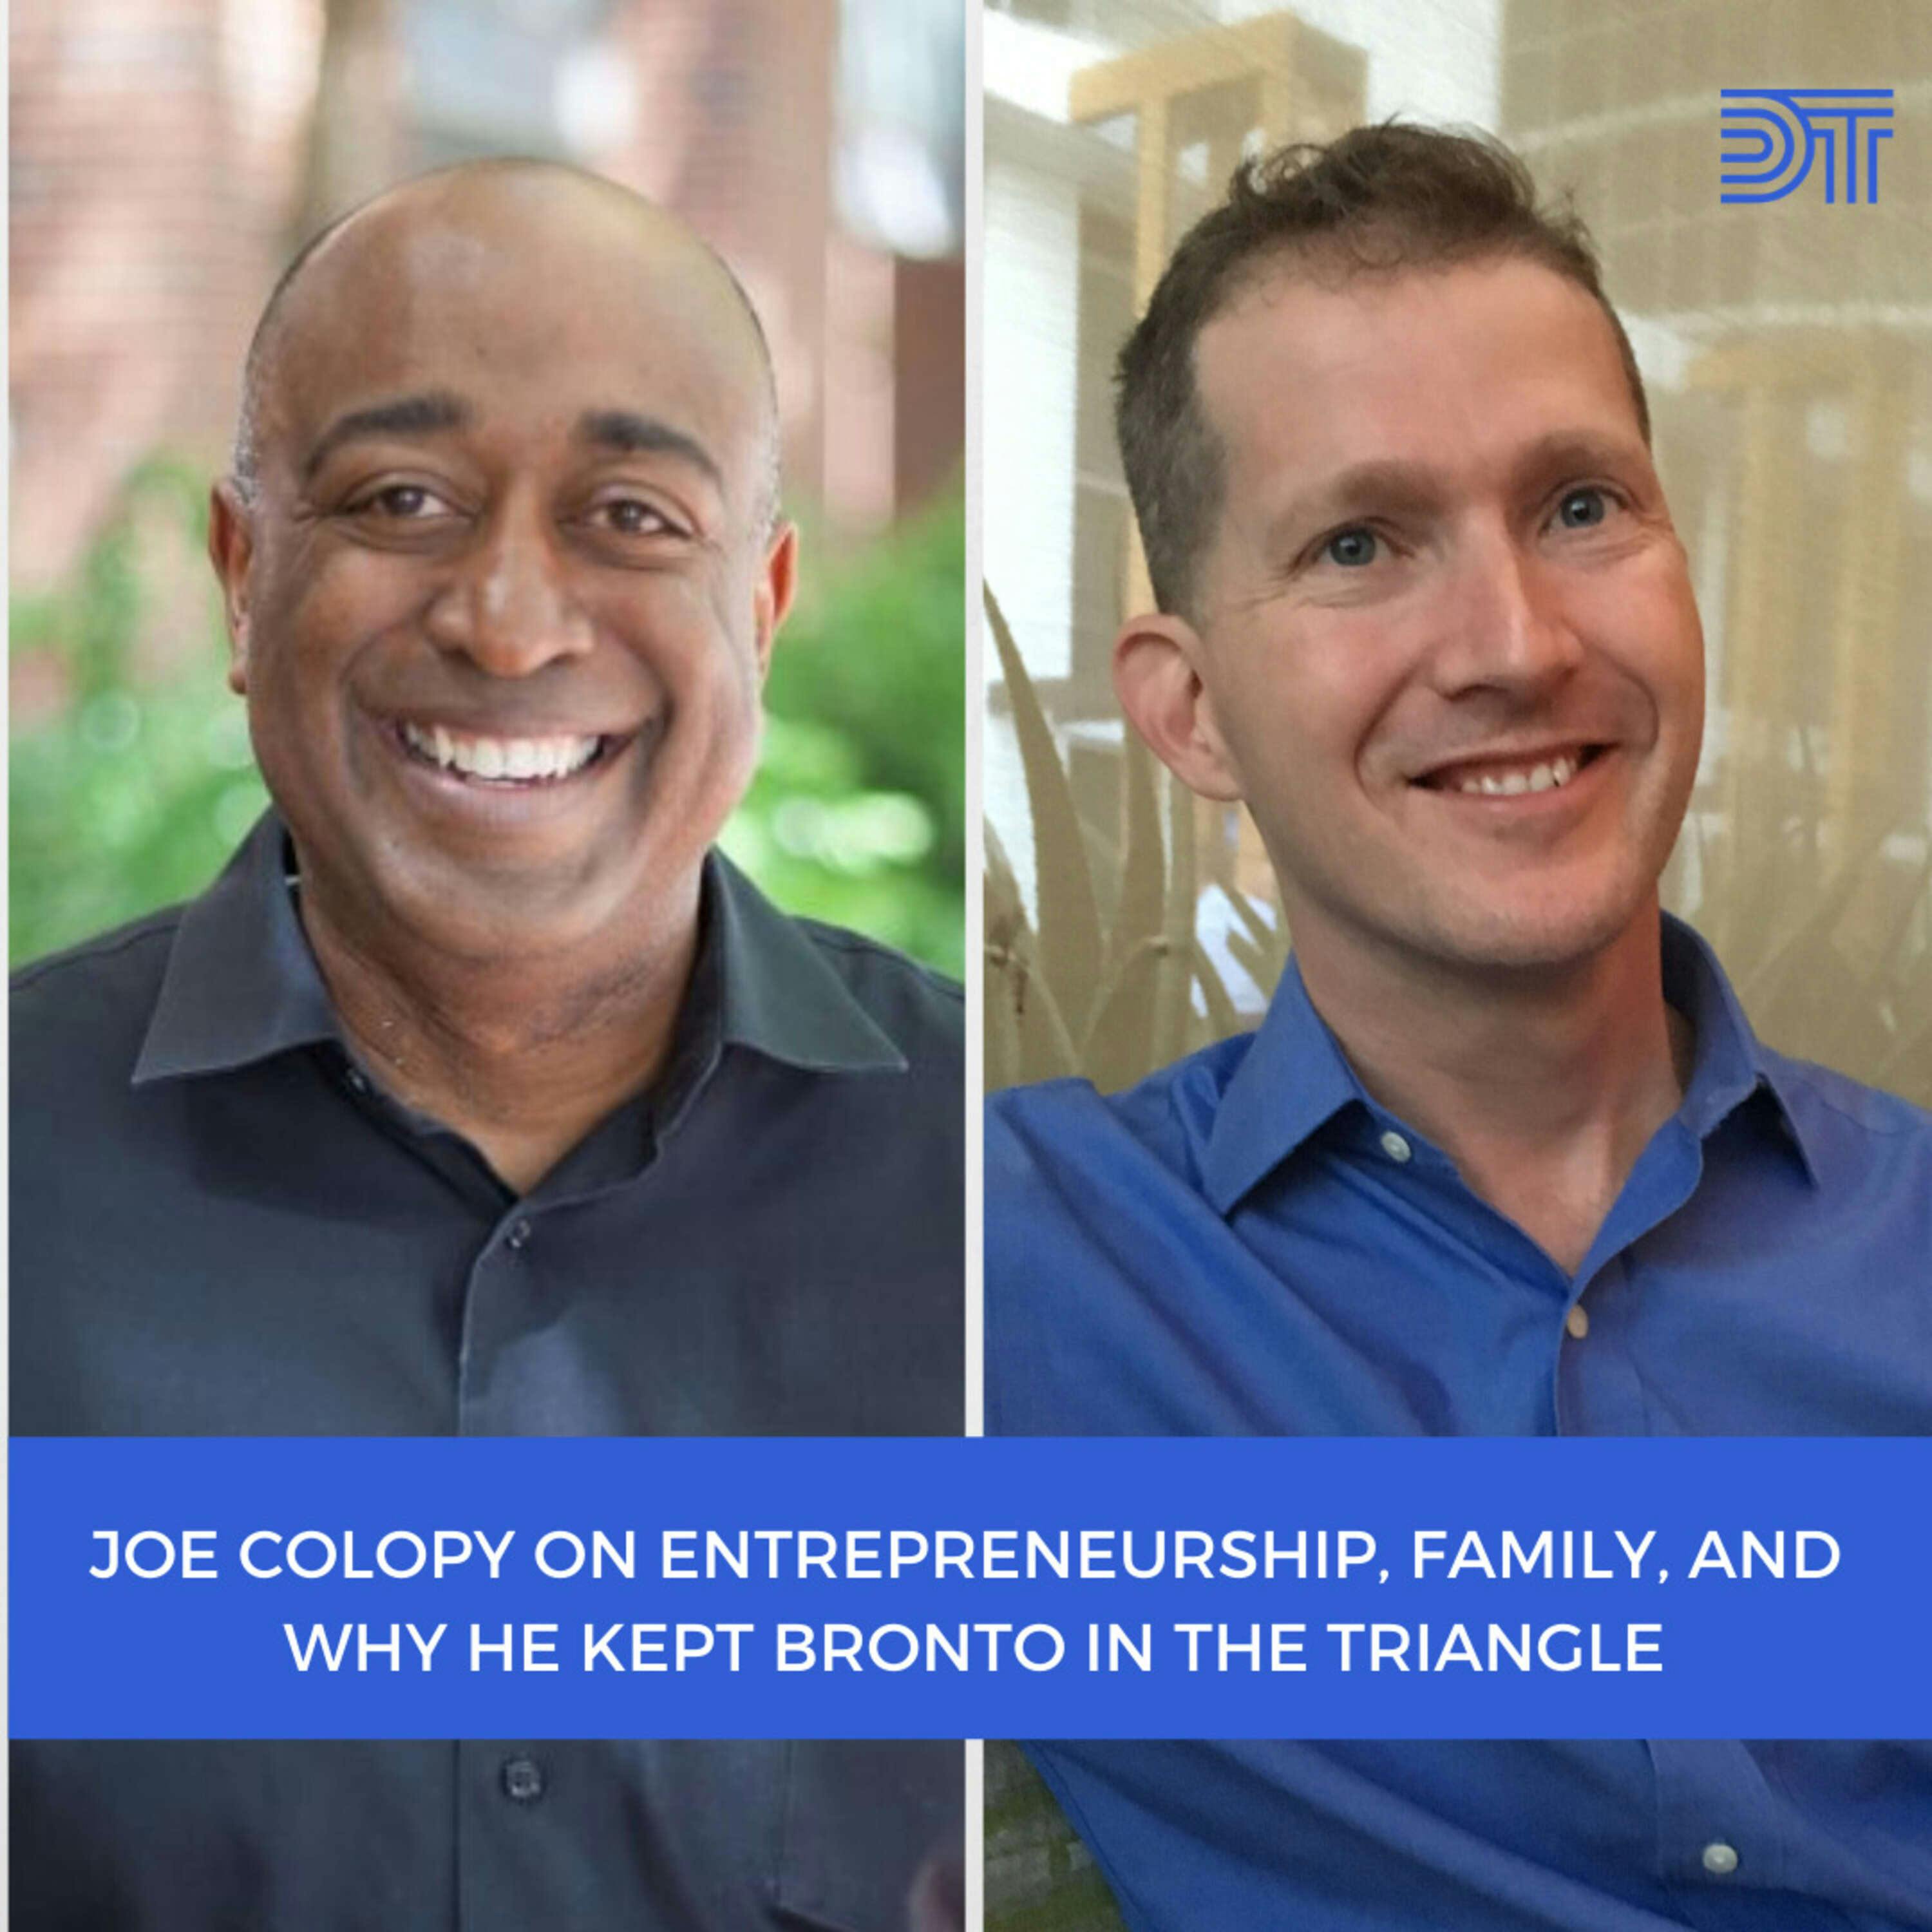 Joe Colopy on Entrepreneurship, Family, and  Why He Kept Bronto in the Triangle